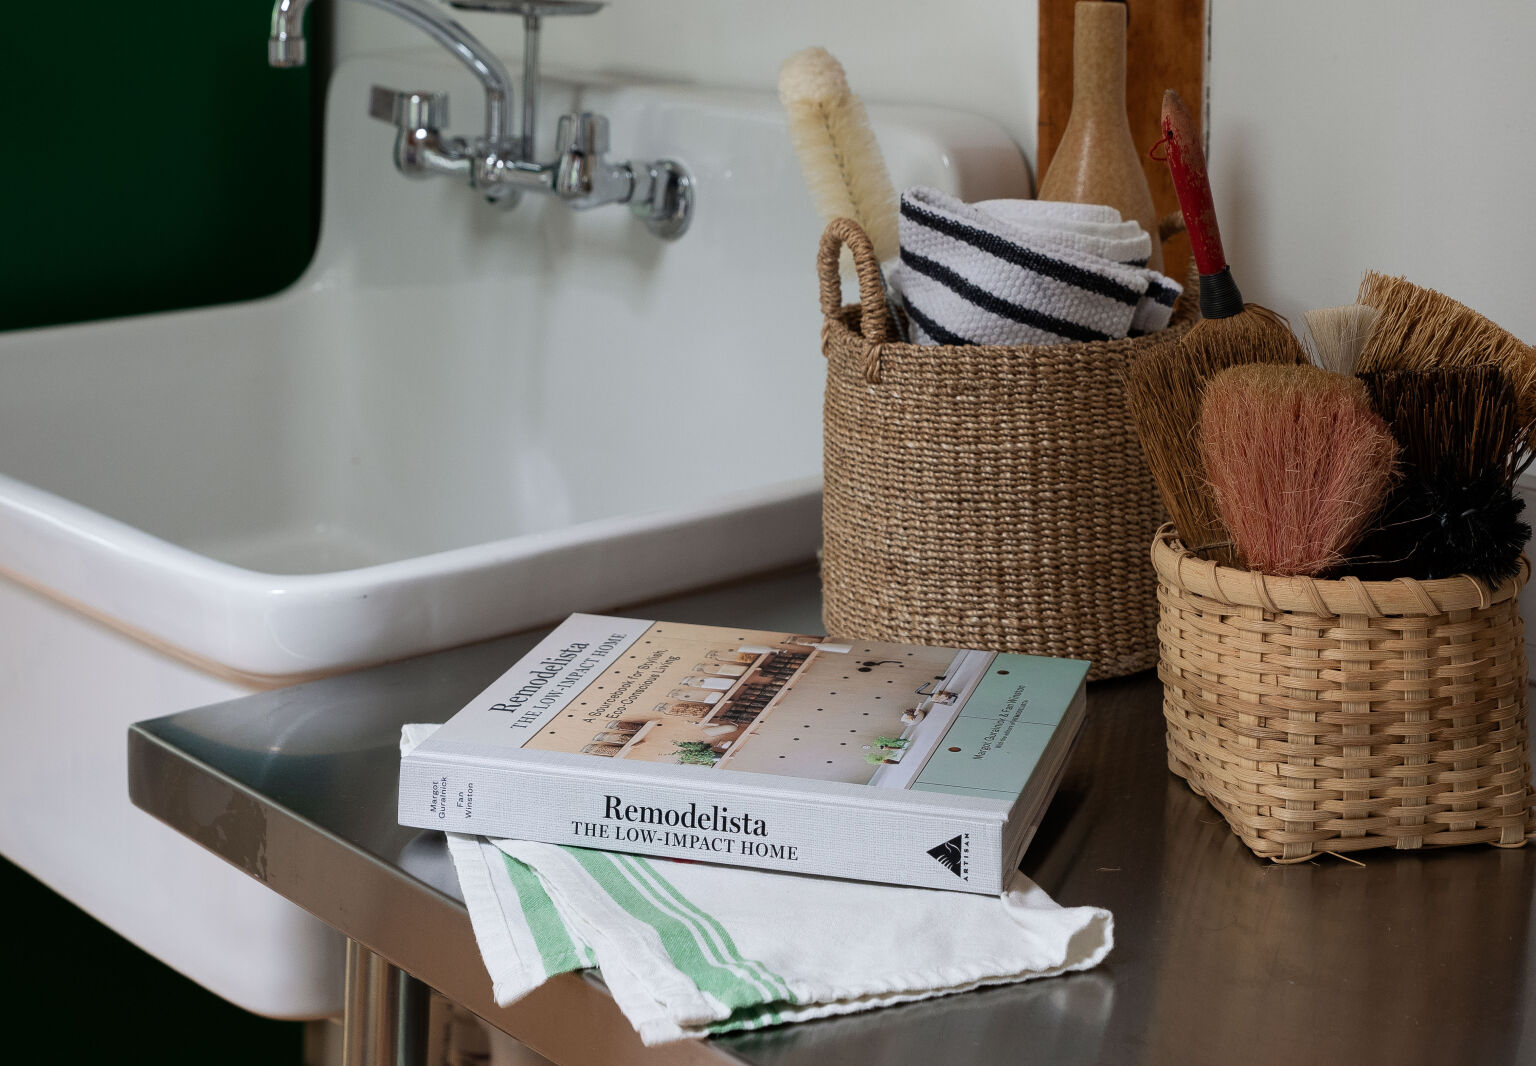 Remodelista Low-Impact Home Issue Cover Image, Volume 16 Issue 40, Photo by Justine Hand for Remodelista